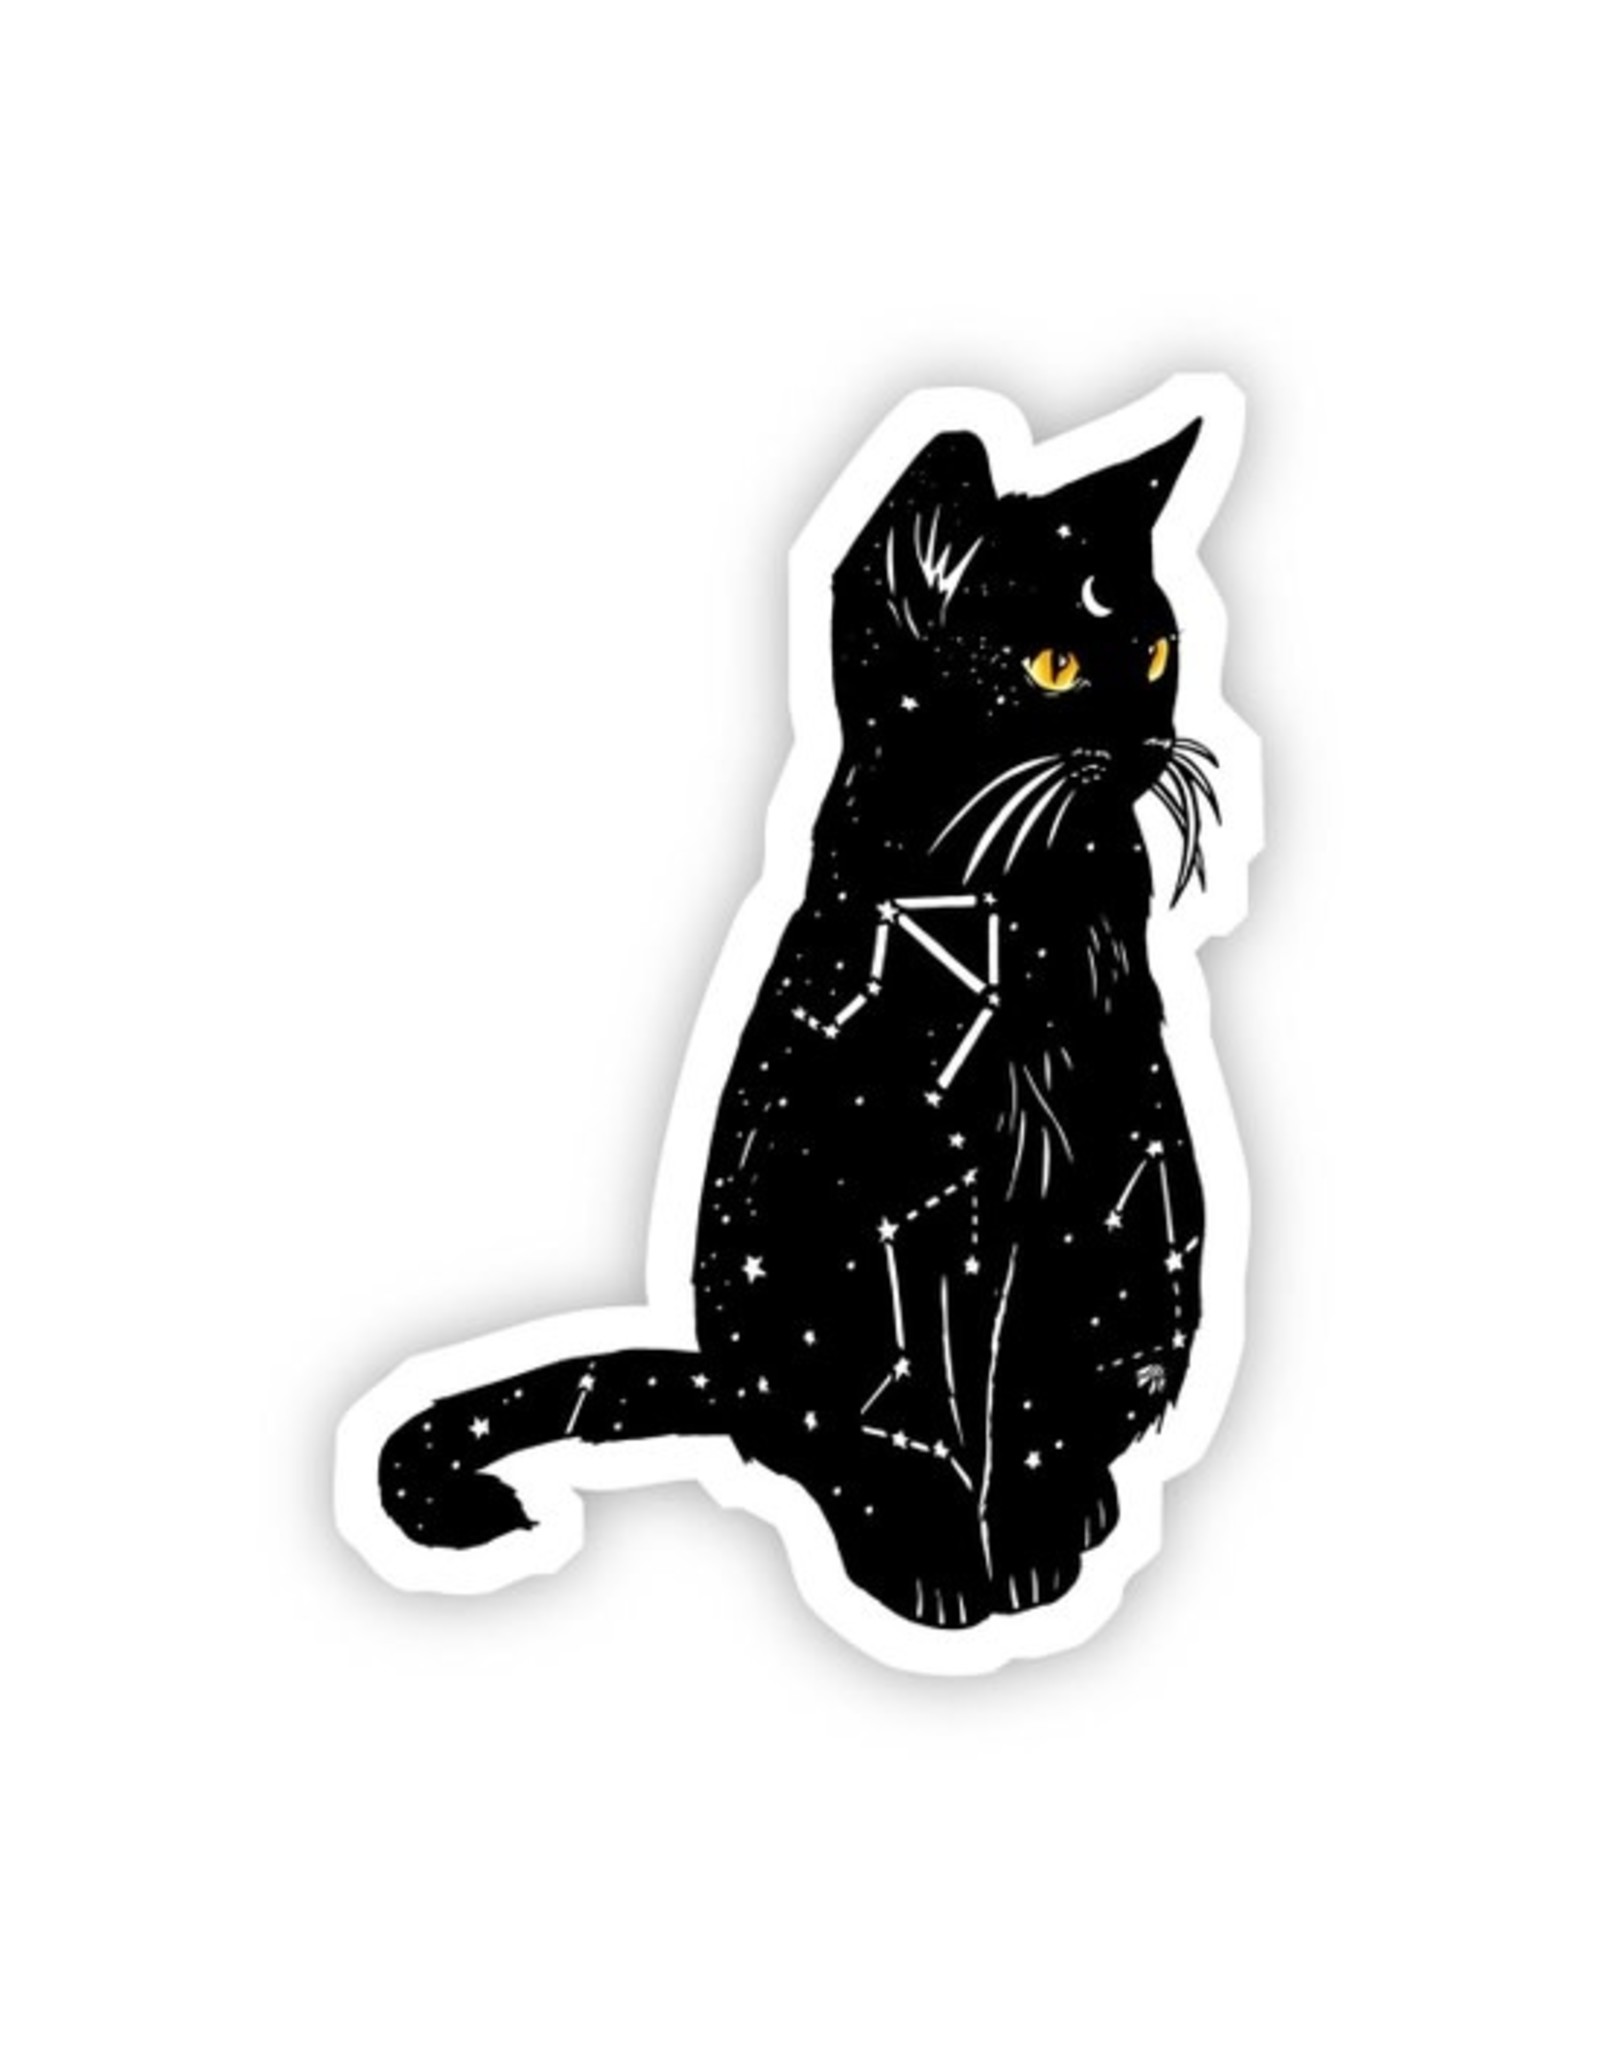 The Florist & The Merchant Black Cat with Yellow Eyes Sticker